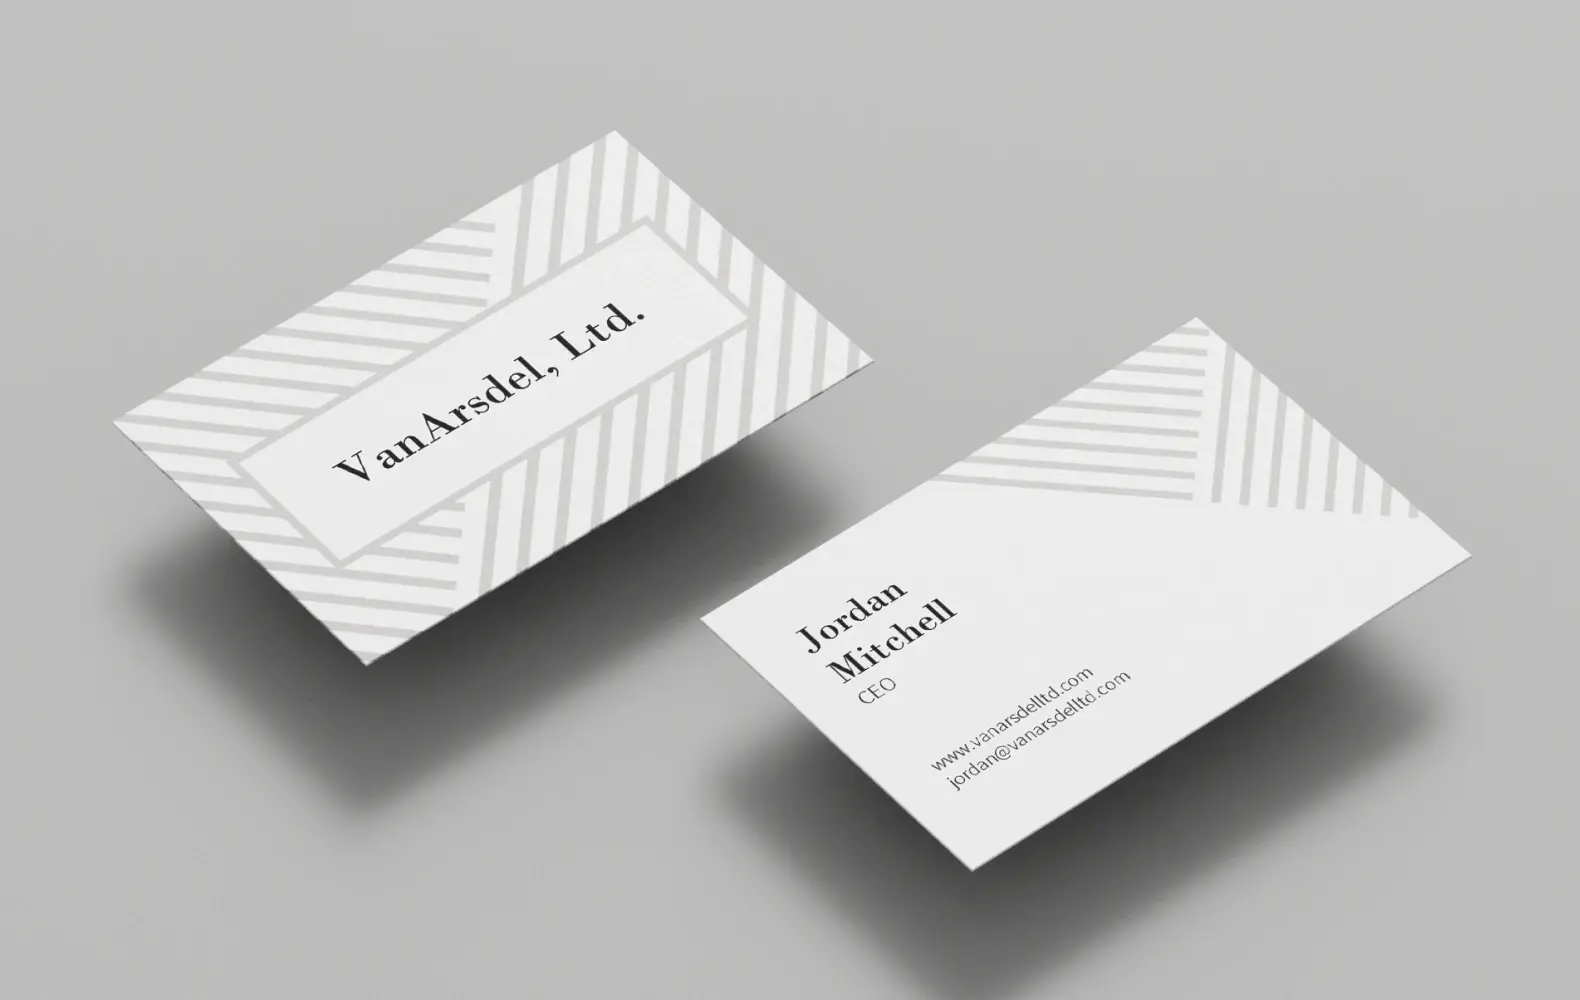 Business cards with a lot of white space.